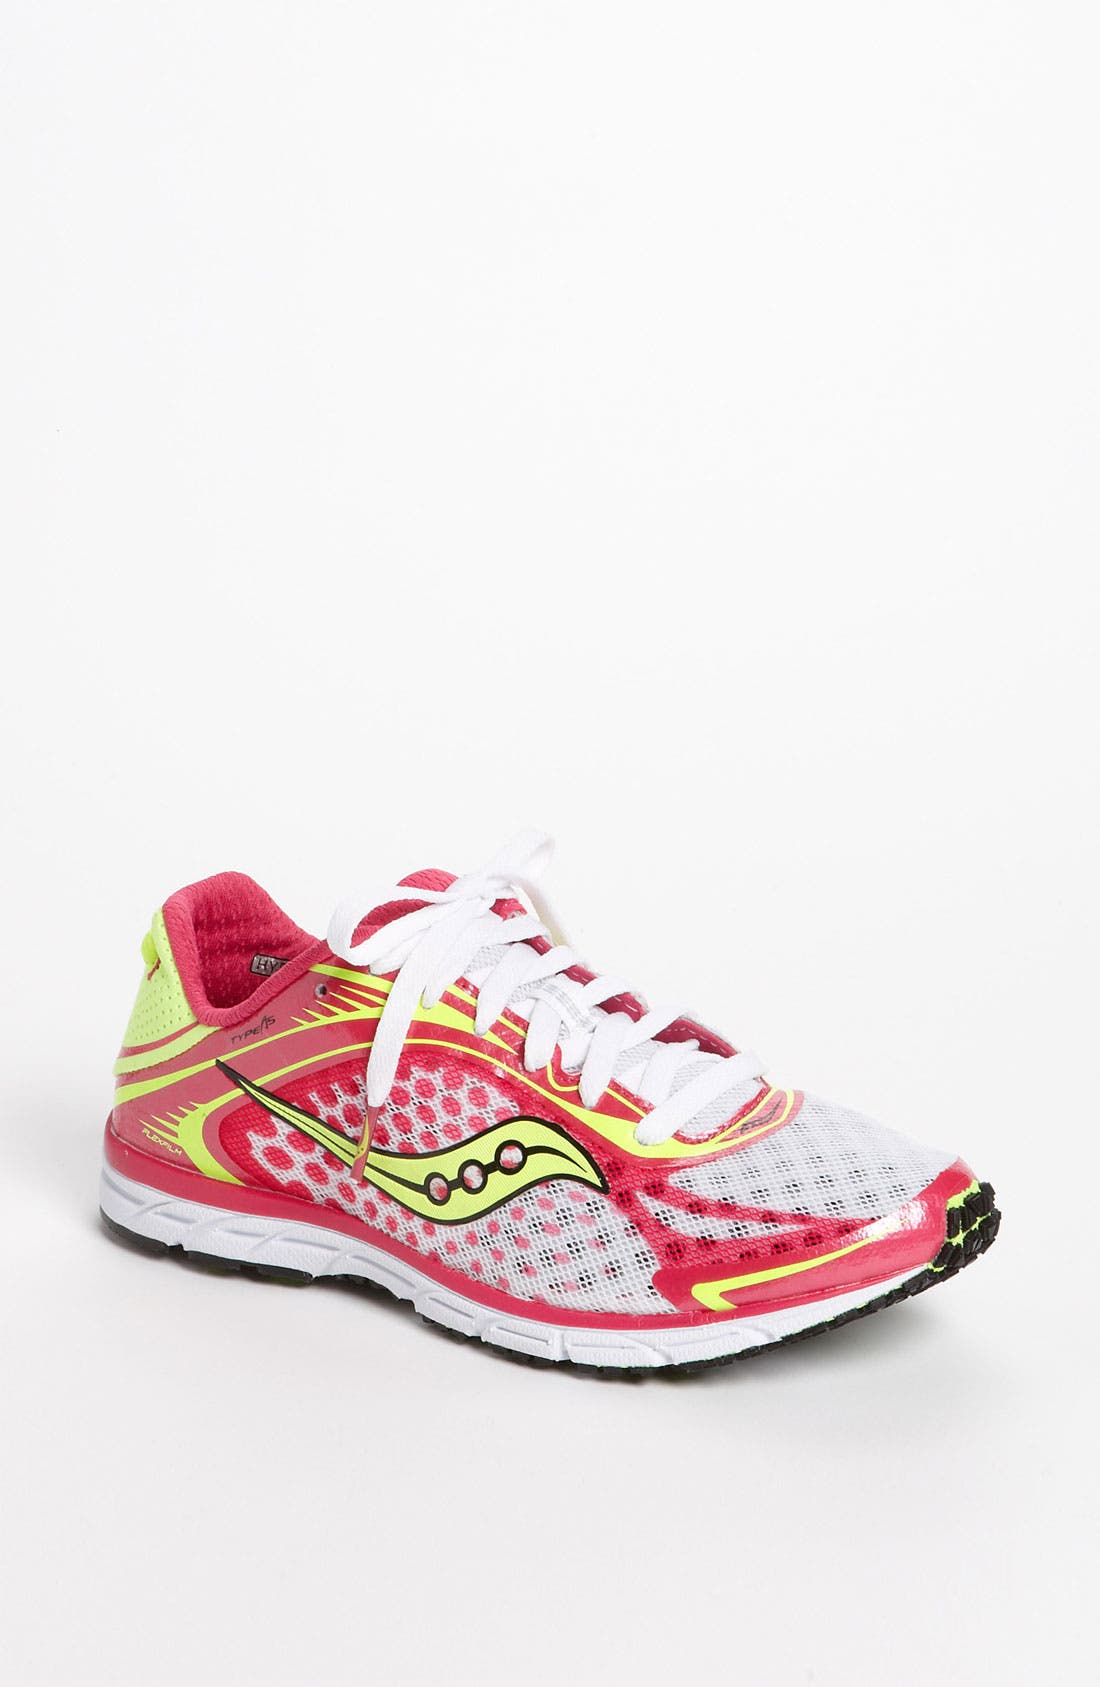 saucony type a5 review women's